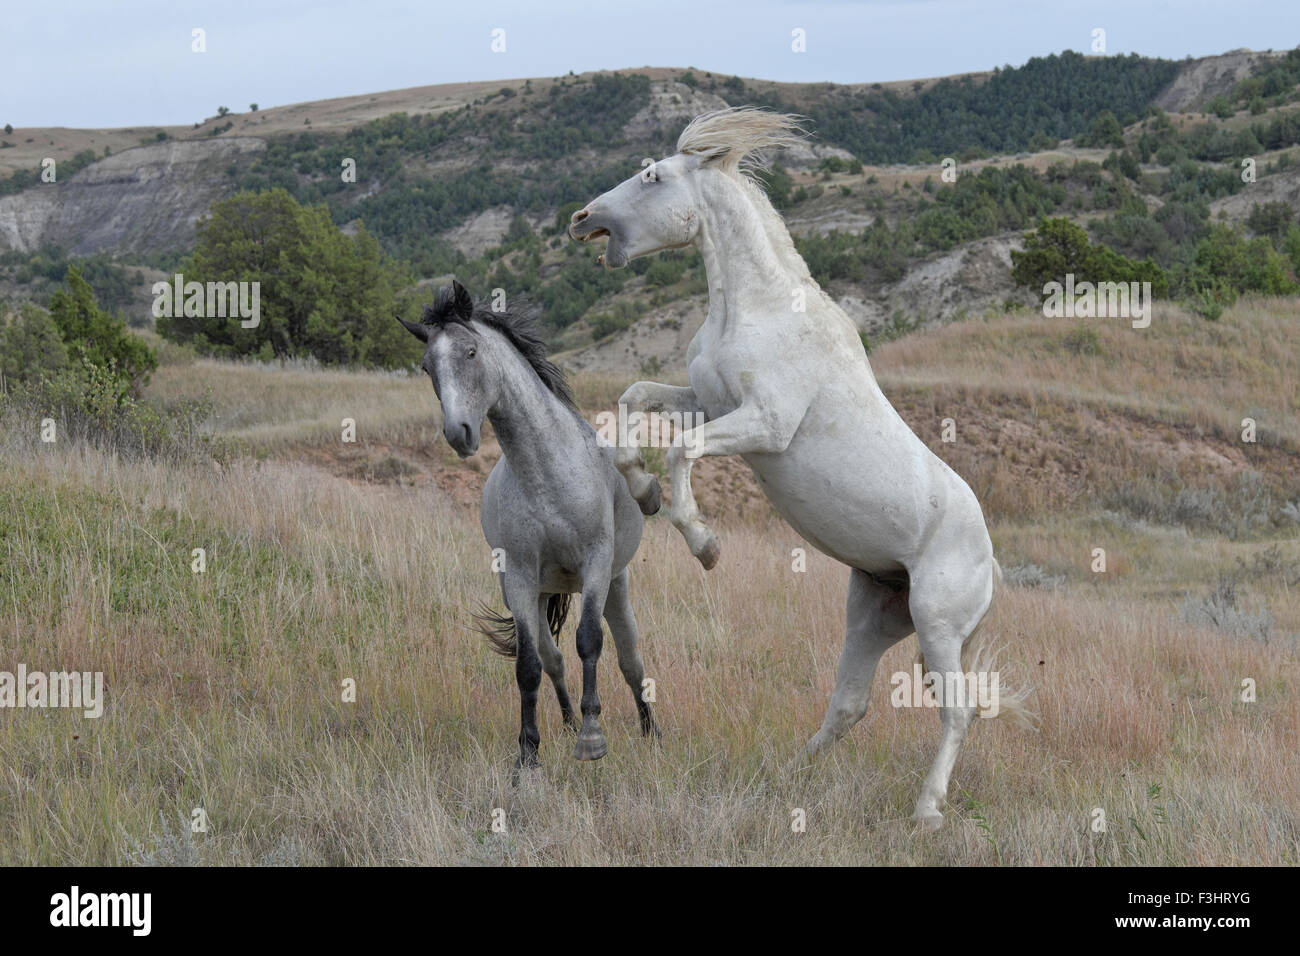 Feral (Wild) Horse, Theodore Roosevelt National Park, Two Stallions in a Brief Skirmish Stock Photo